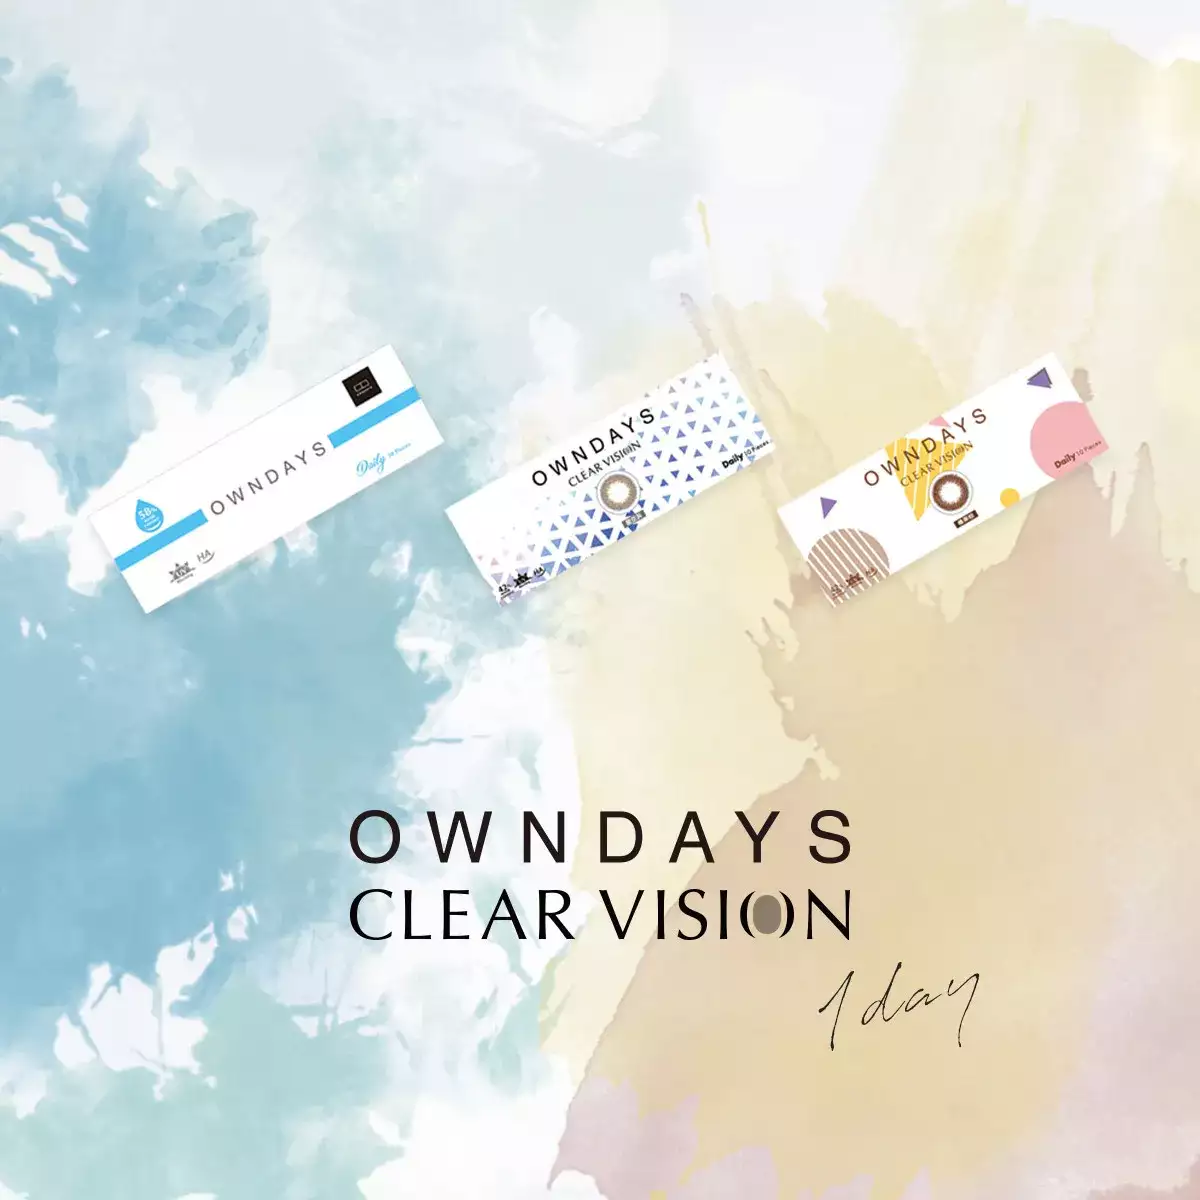 OWNDAYS CLEAR VISION